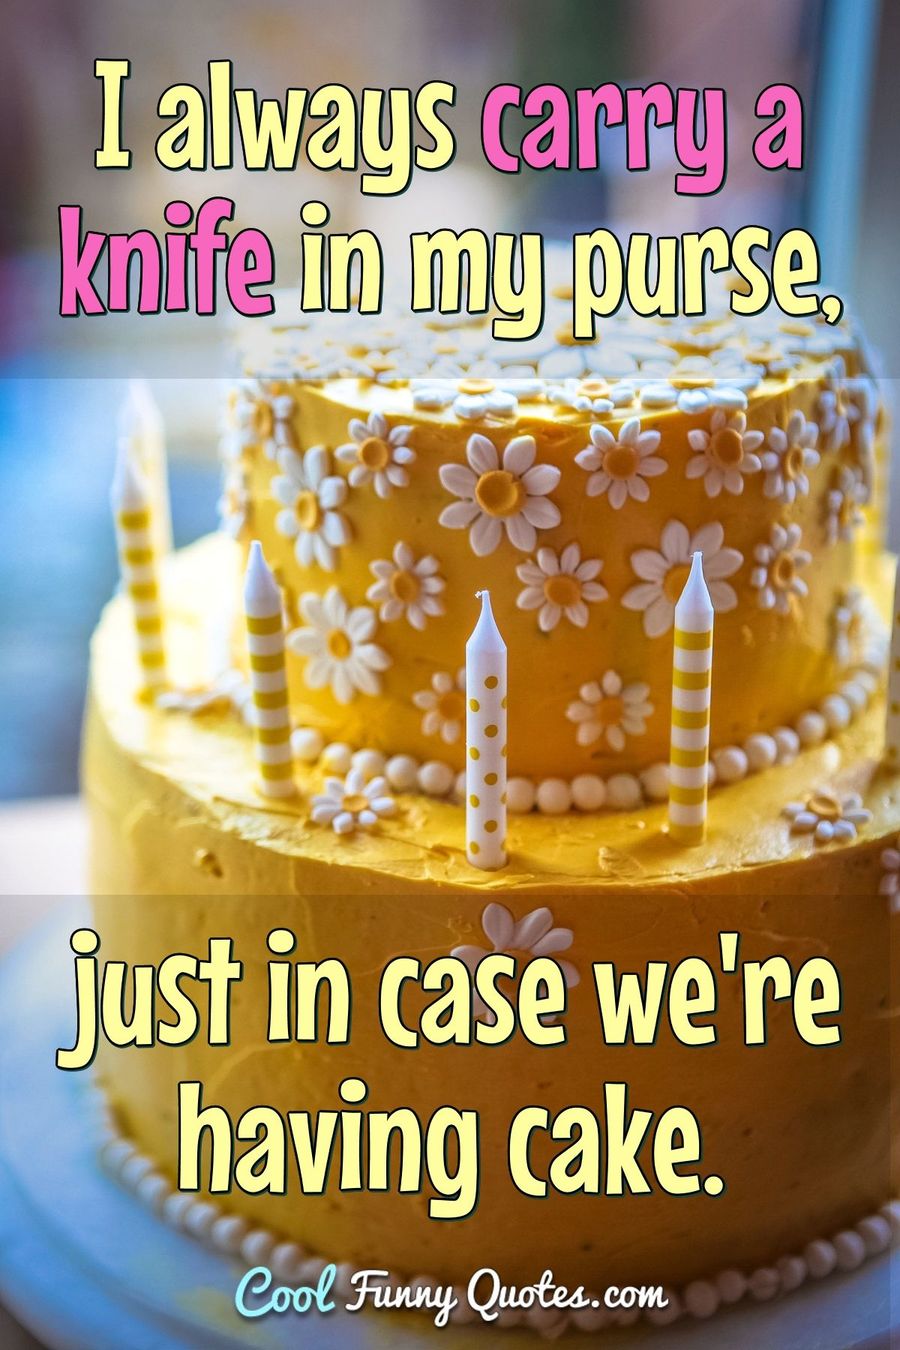 I always carry a knife in my purse, just in case we're having cake.